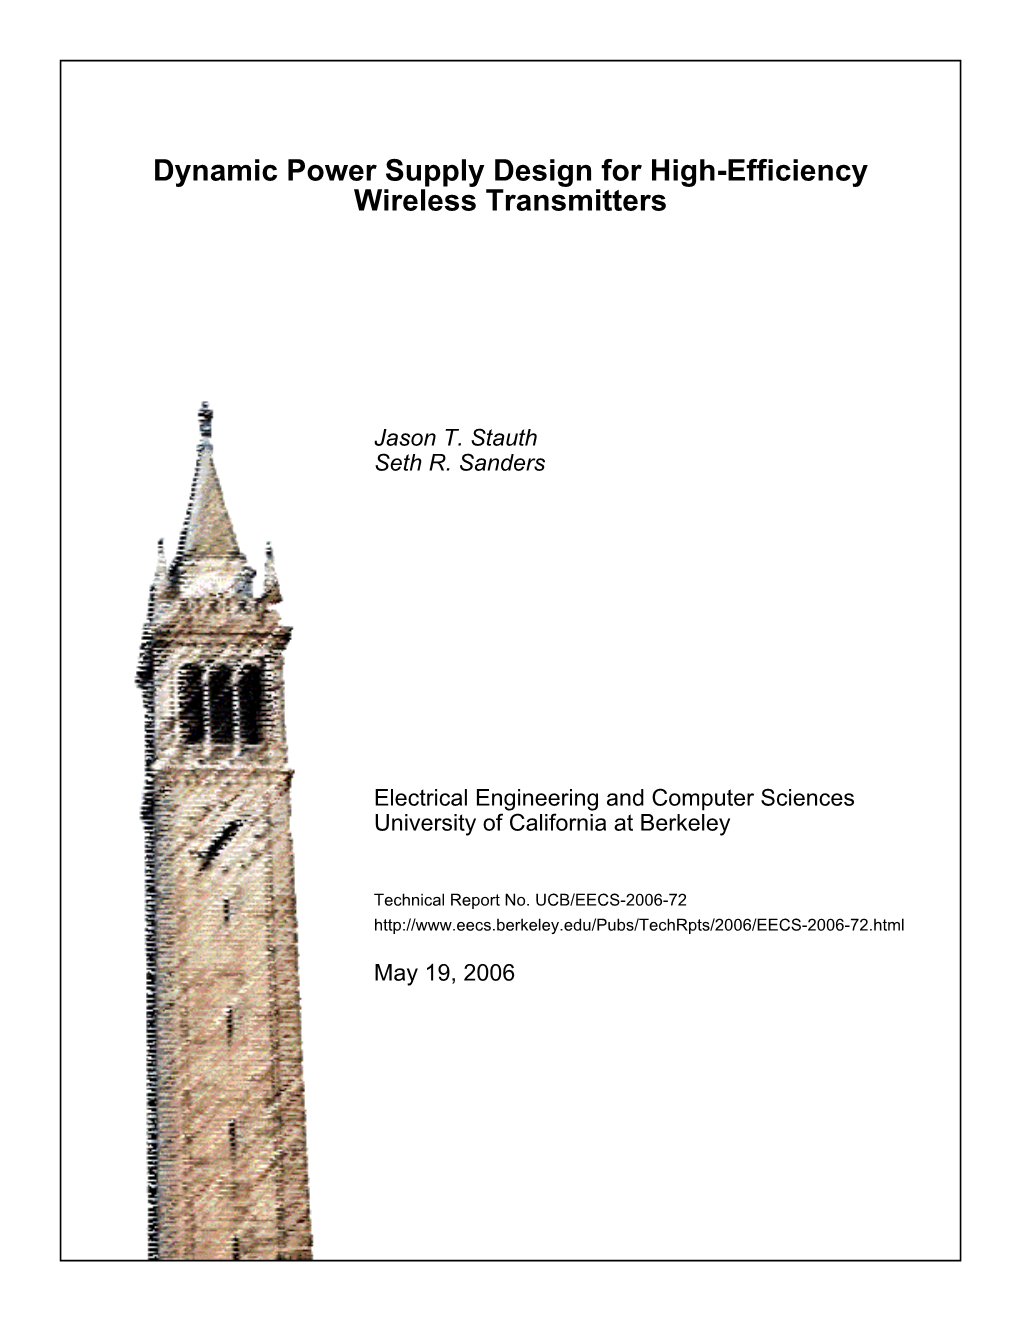 Dynamic Power Supply Design for High-Efficiency Wireless Transmitters